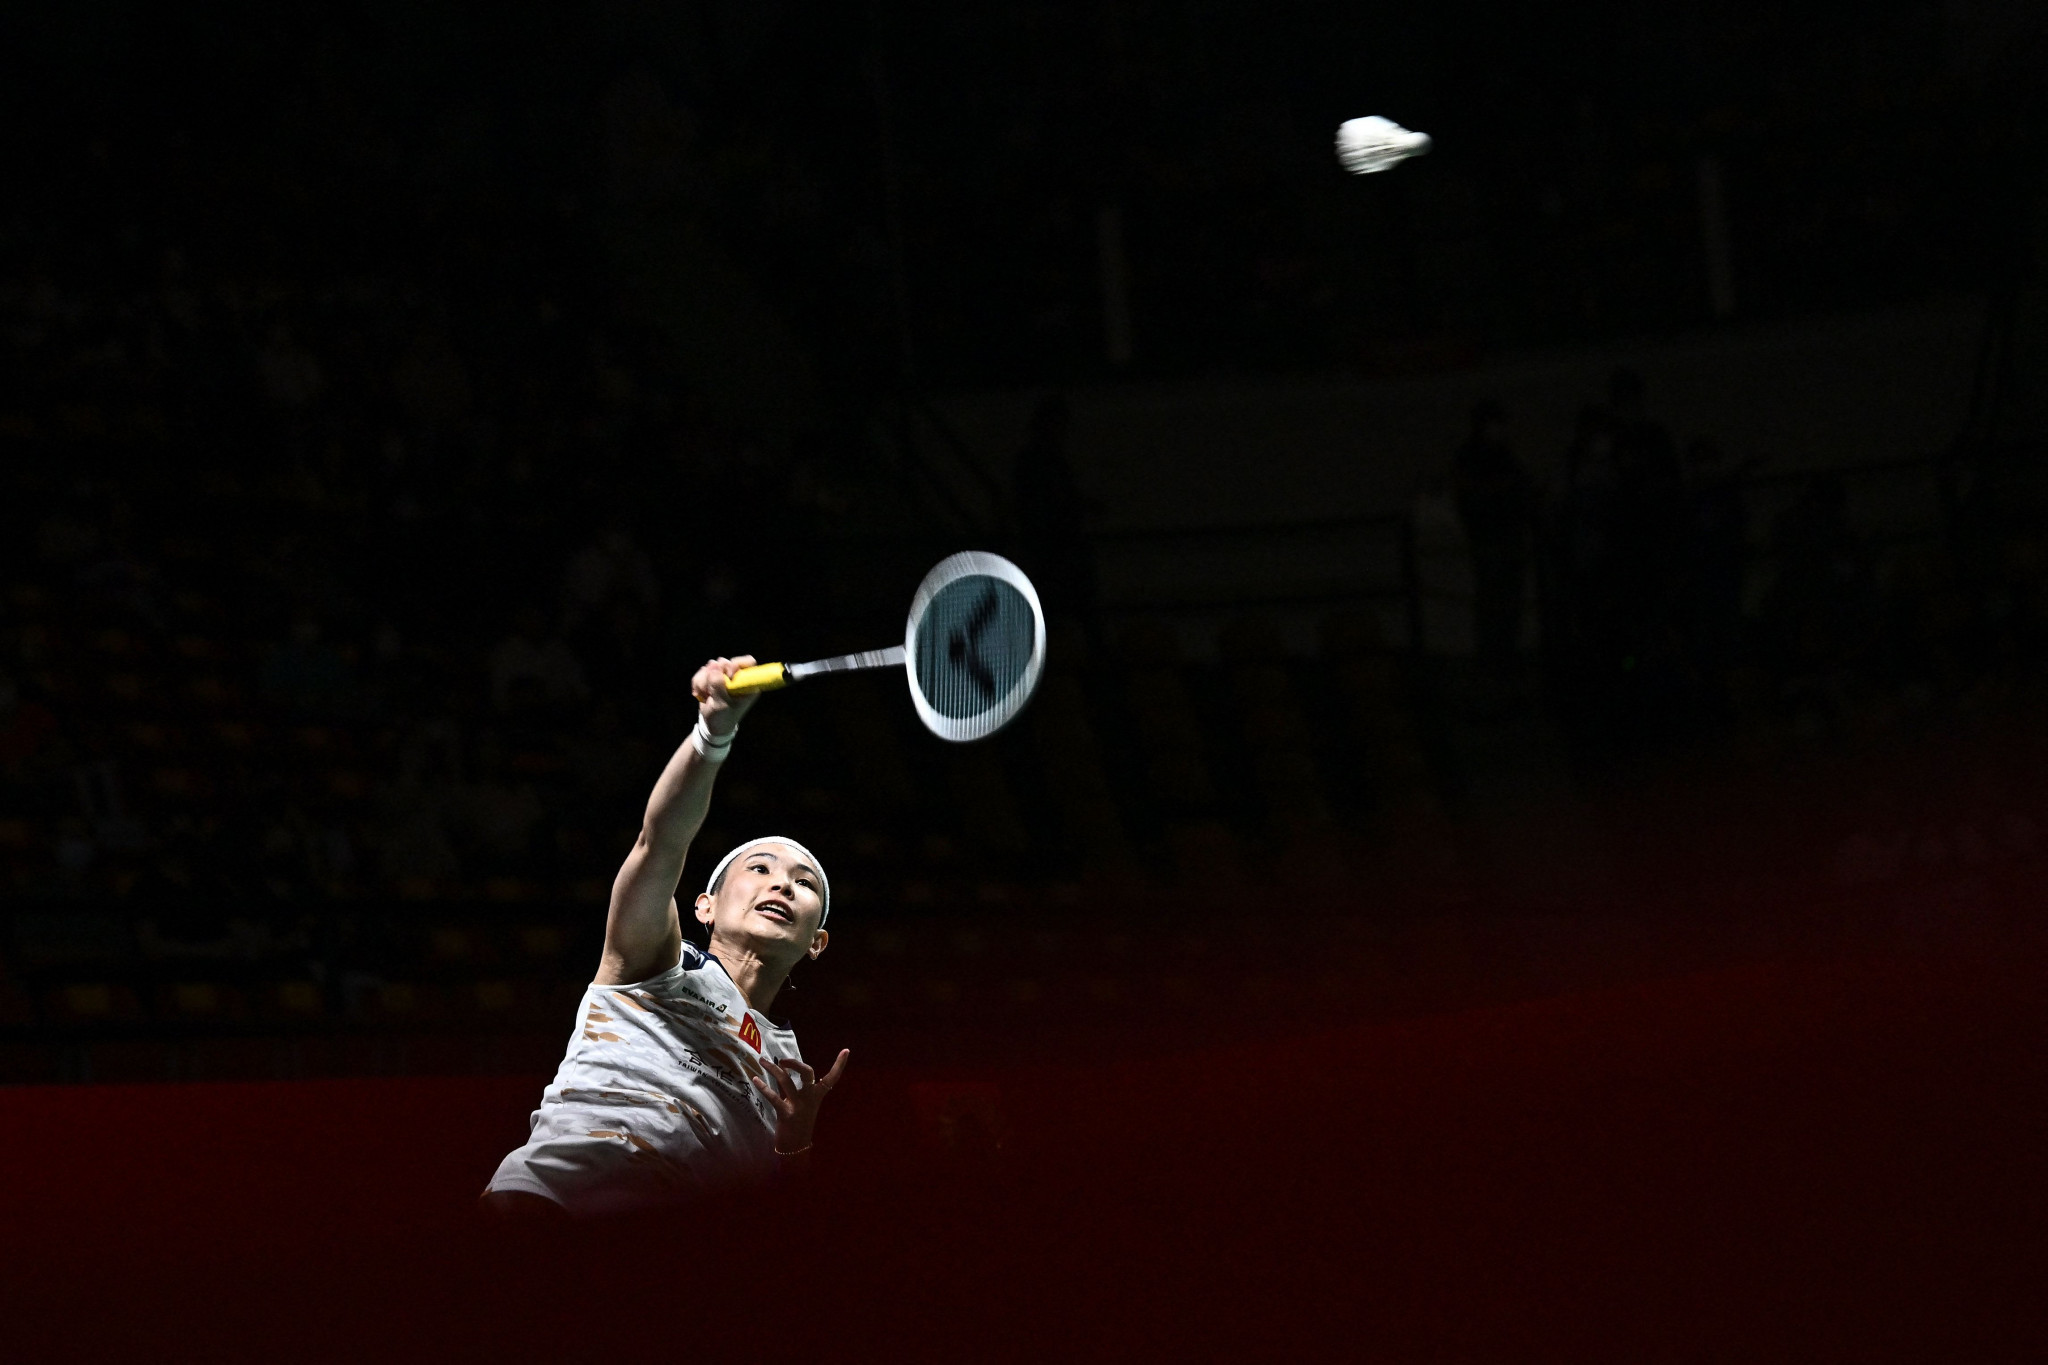 Olympic badminton silver medallist to retire after Paris 2024